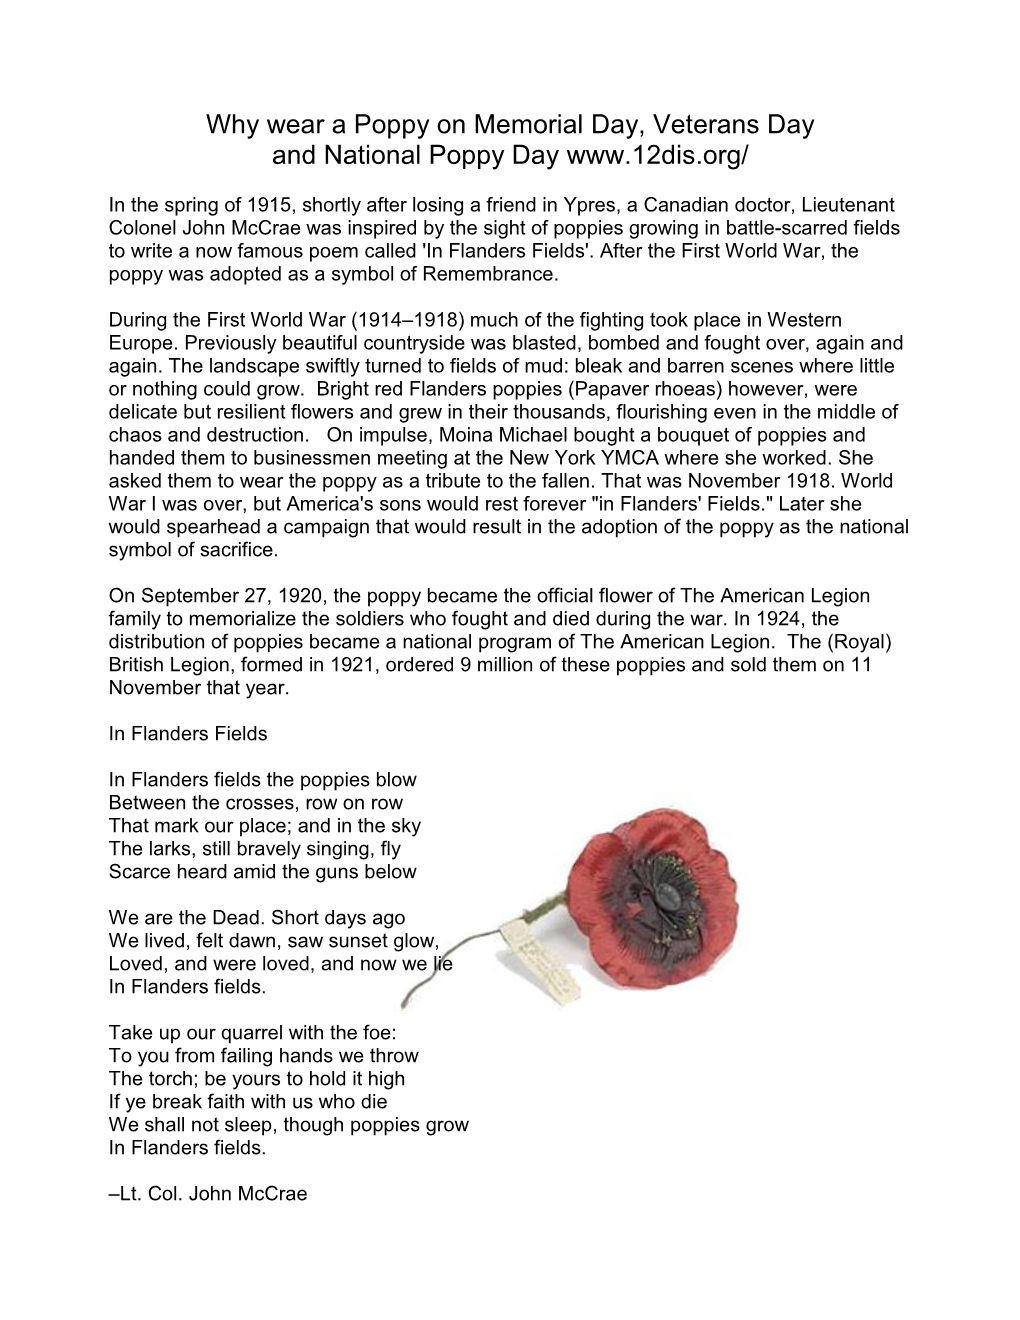 Why Wear a Poppy on Memorial Day, Veterans Day and National Poppy Day